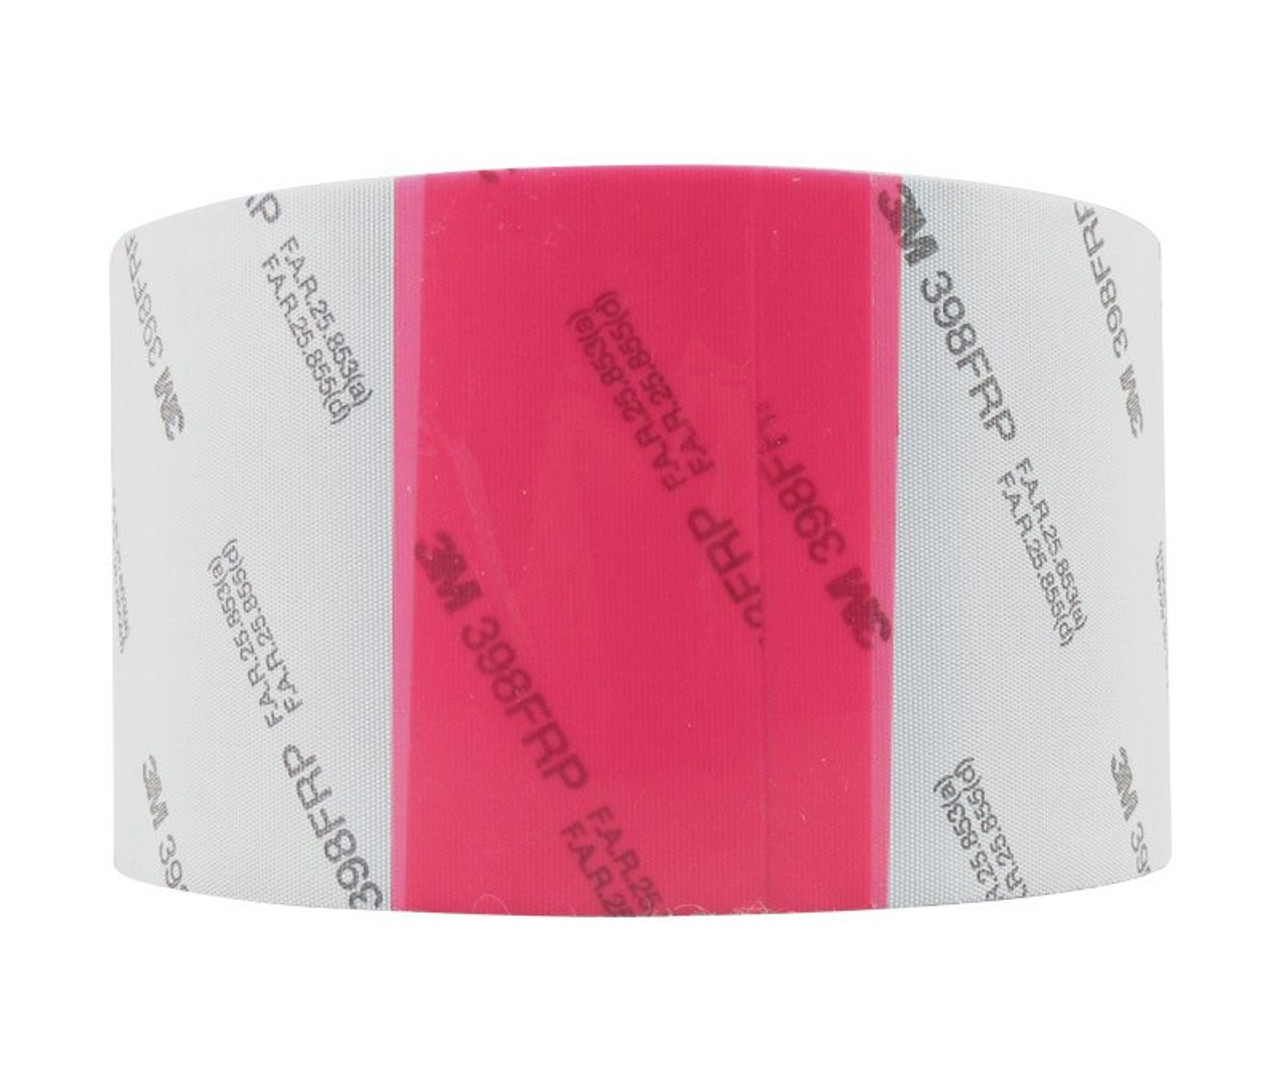 Wintape 3m Pink Clothing Tape Measure Dual Scales Long Soft